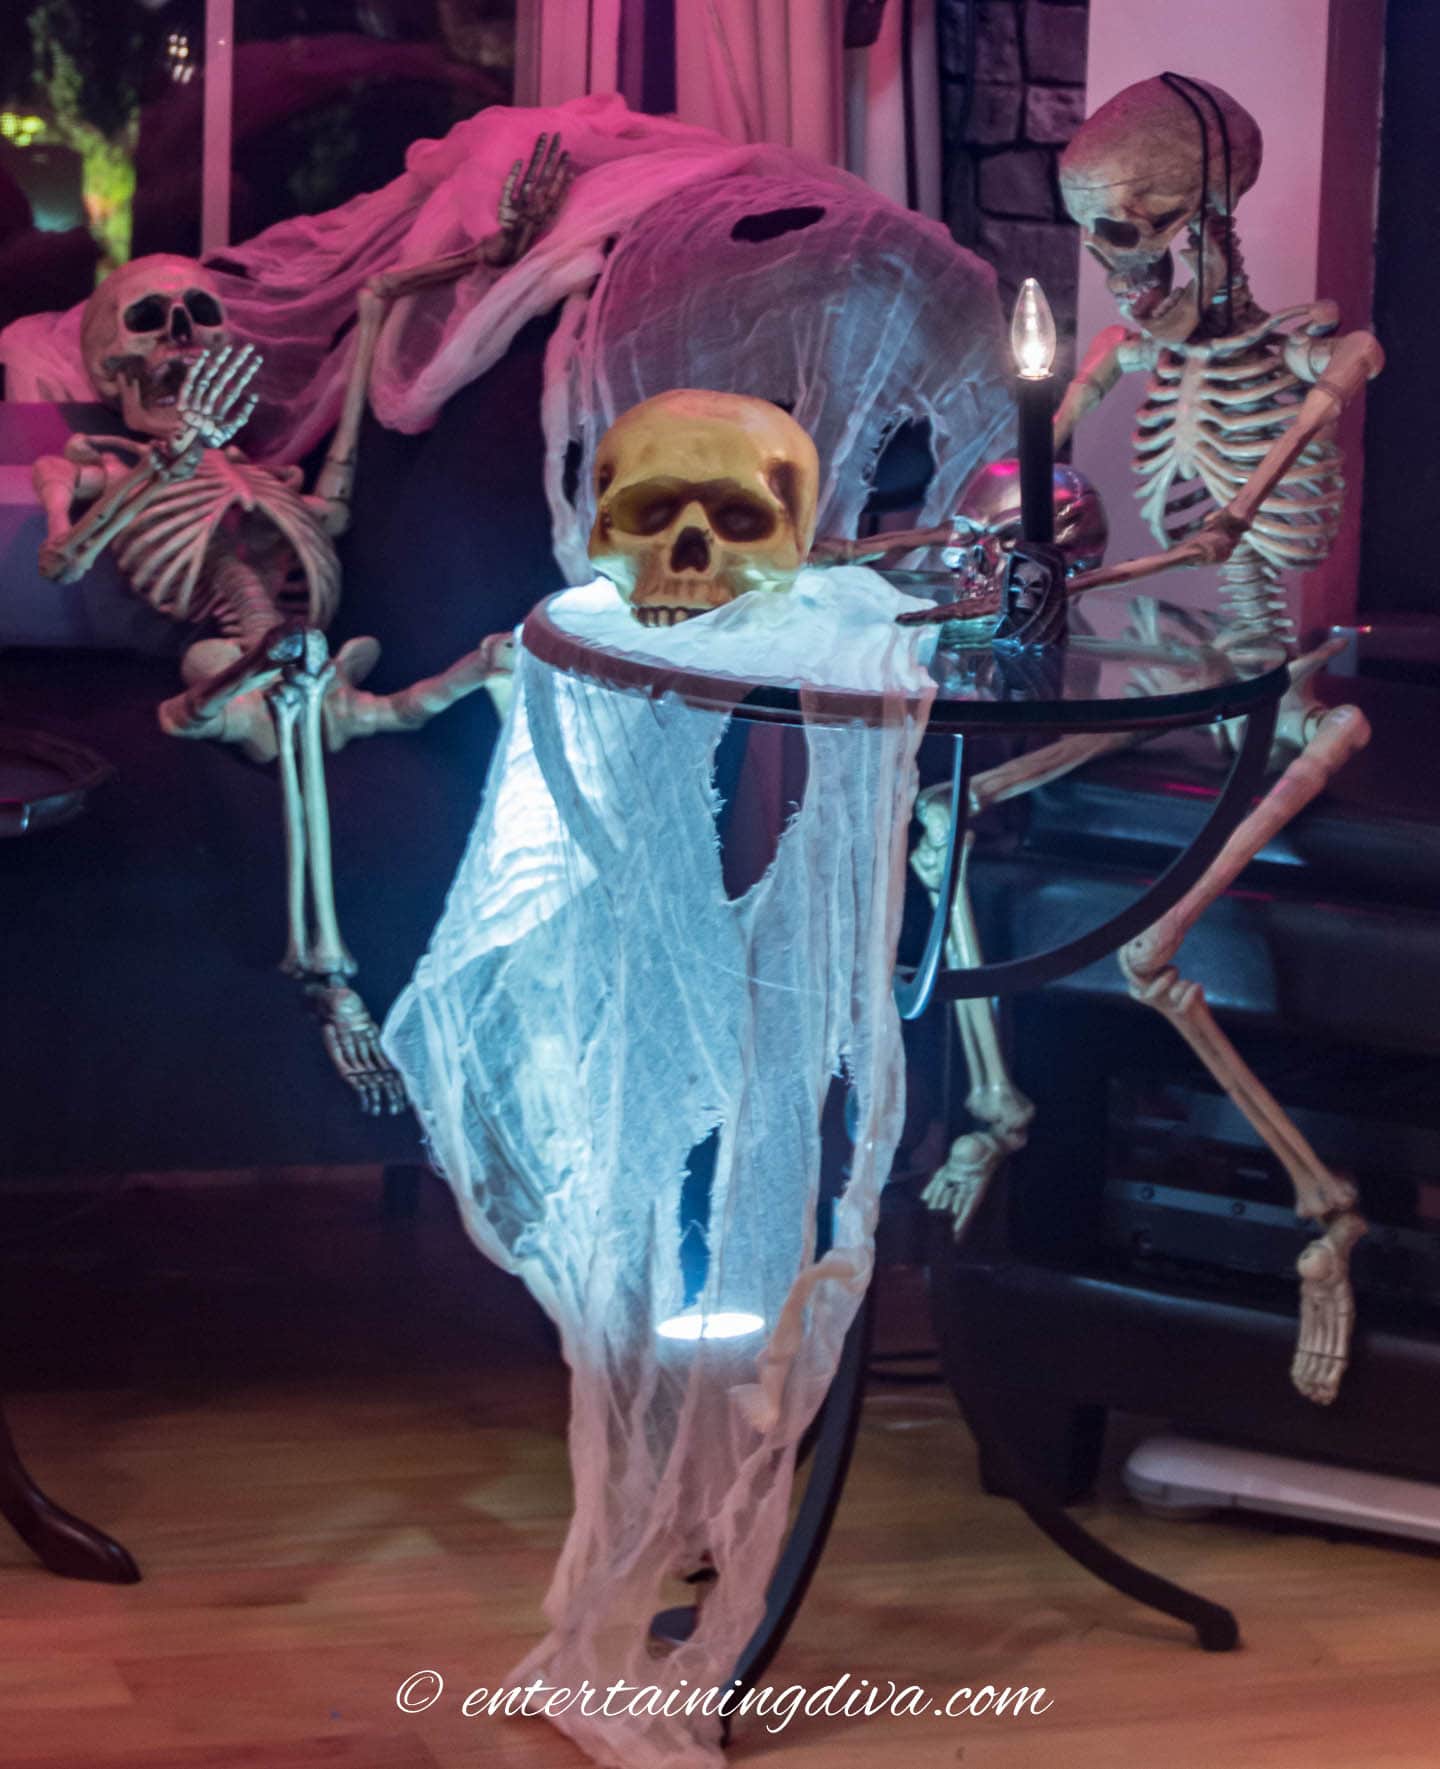 Two skeletons sitting around a small glass table with a skull, a candle and some white creepy cloth that is lit from below